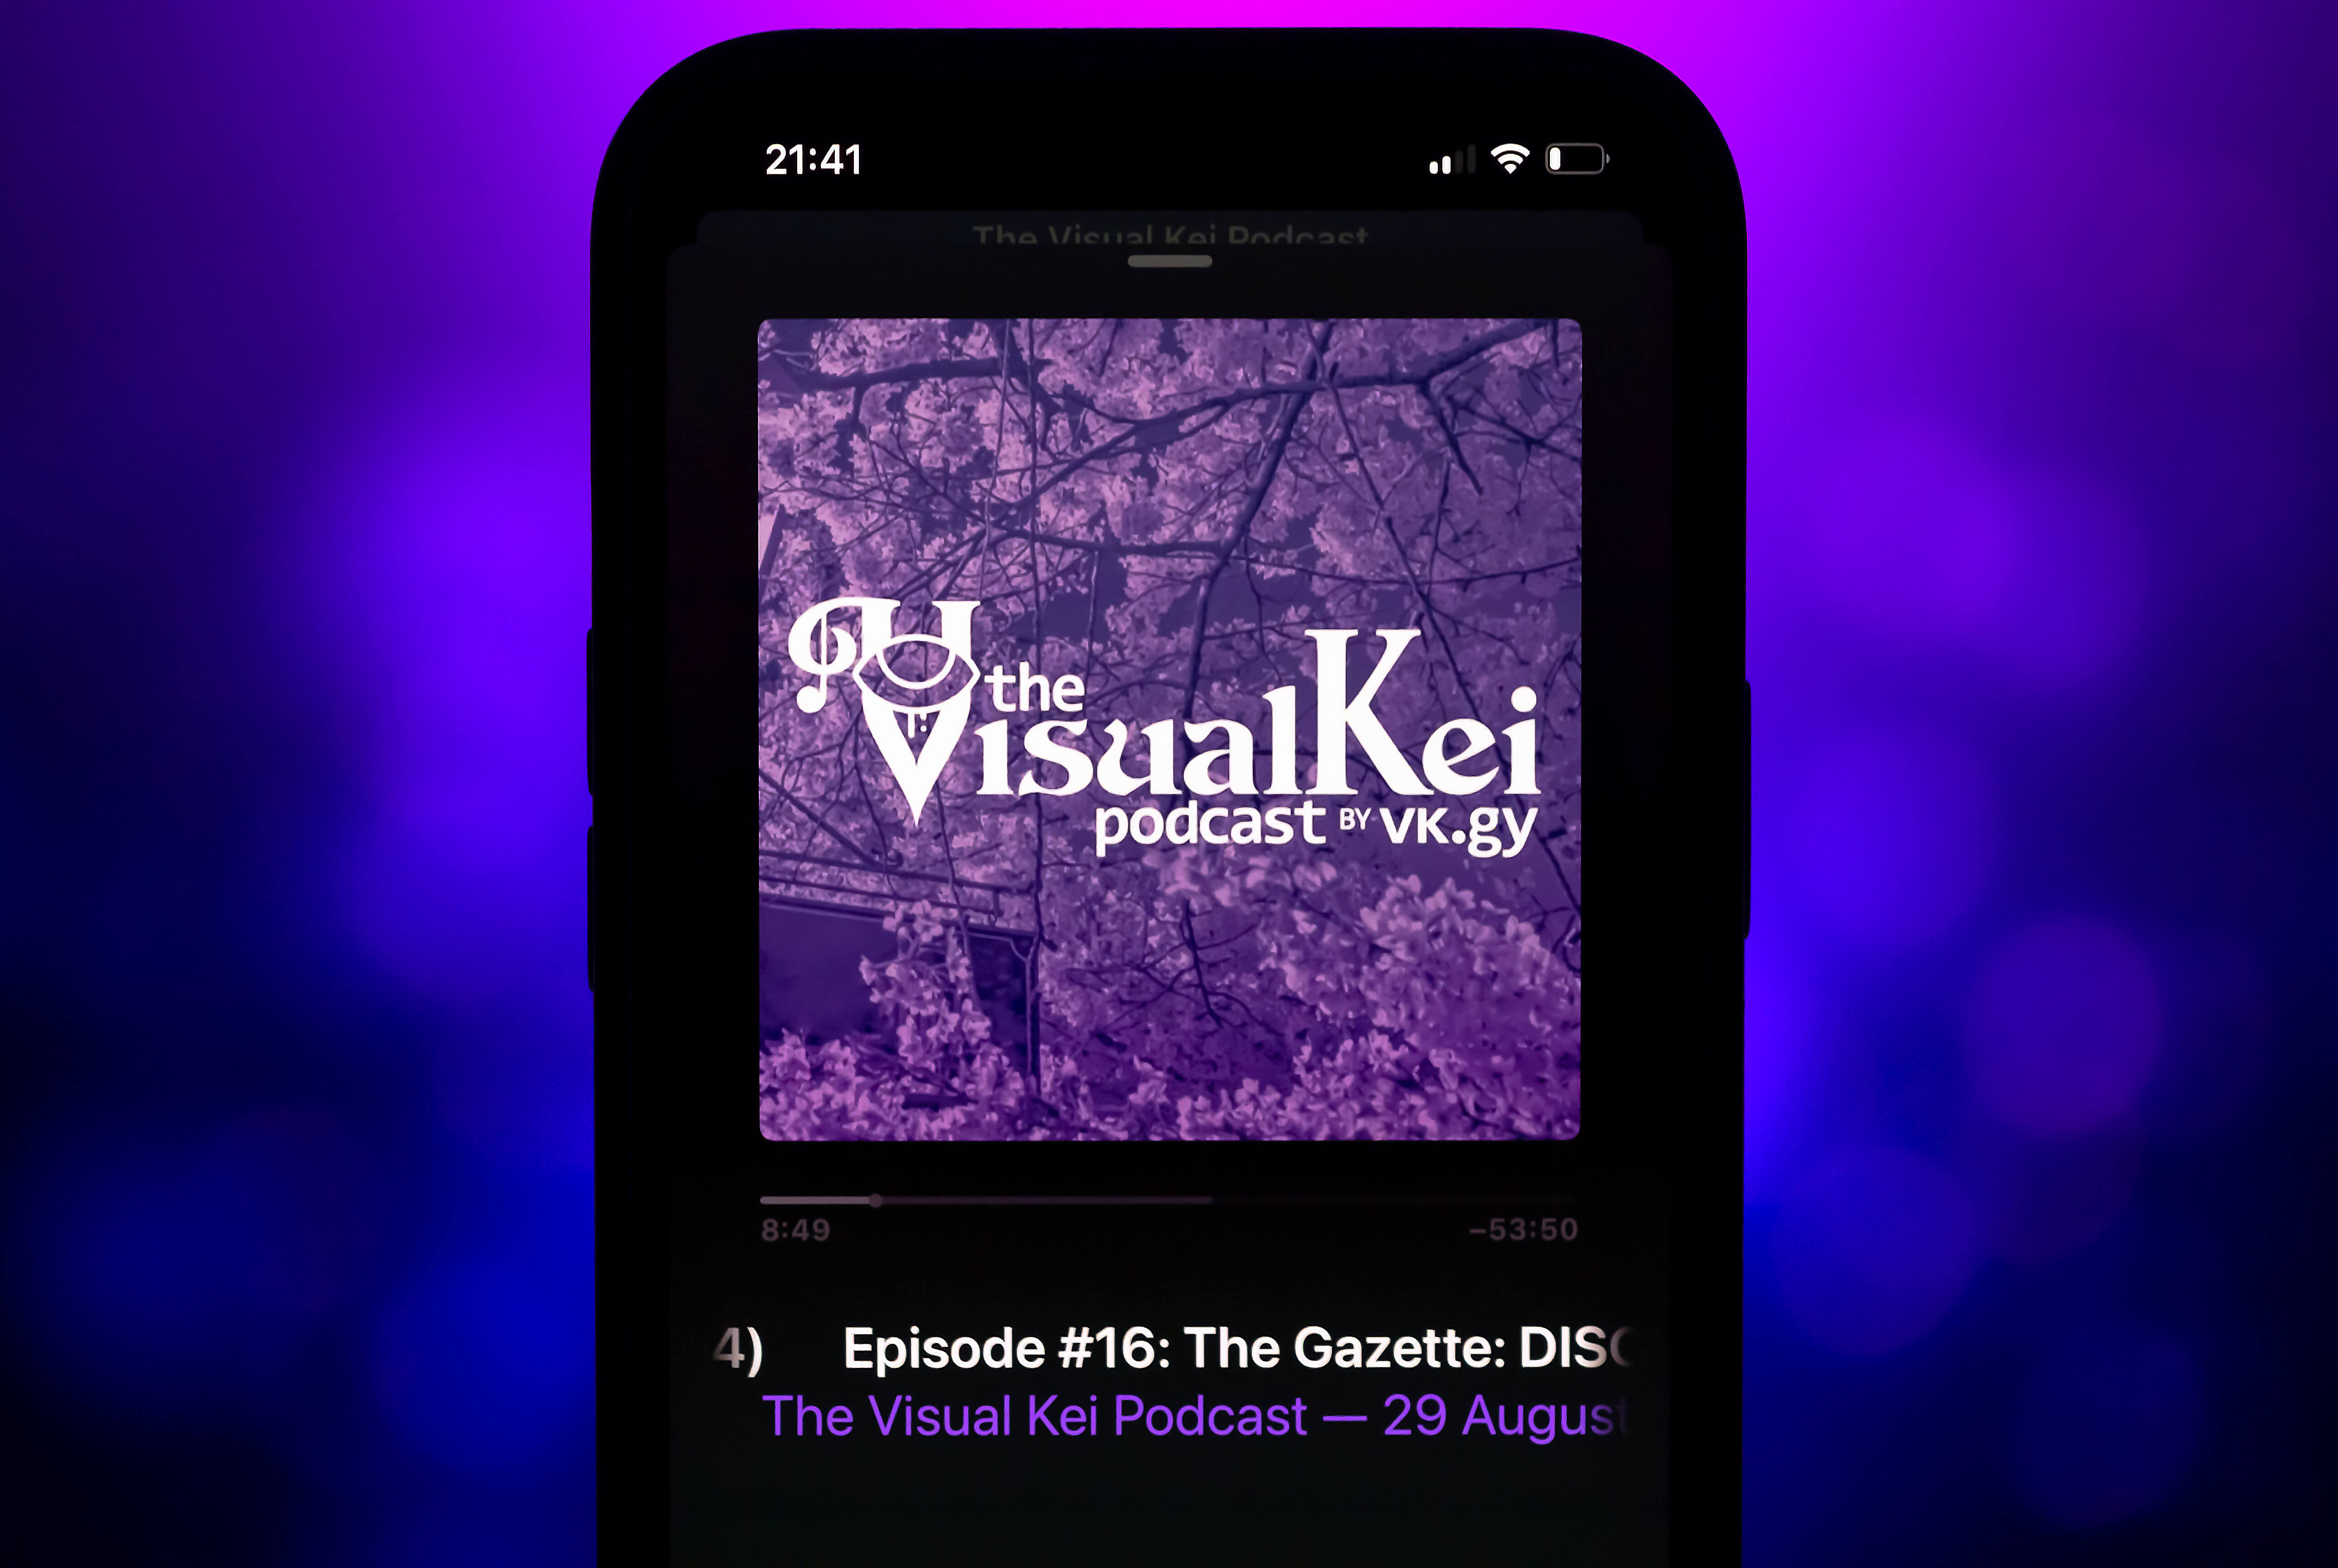 The Visual Kei Podcast discuss The Gazette's DISORDER